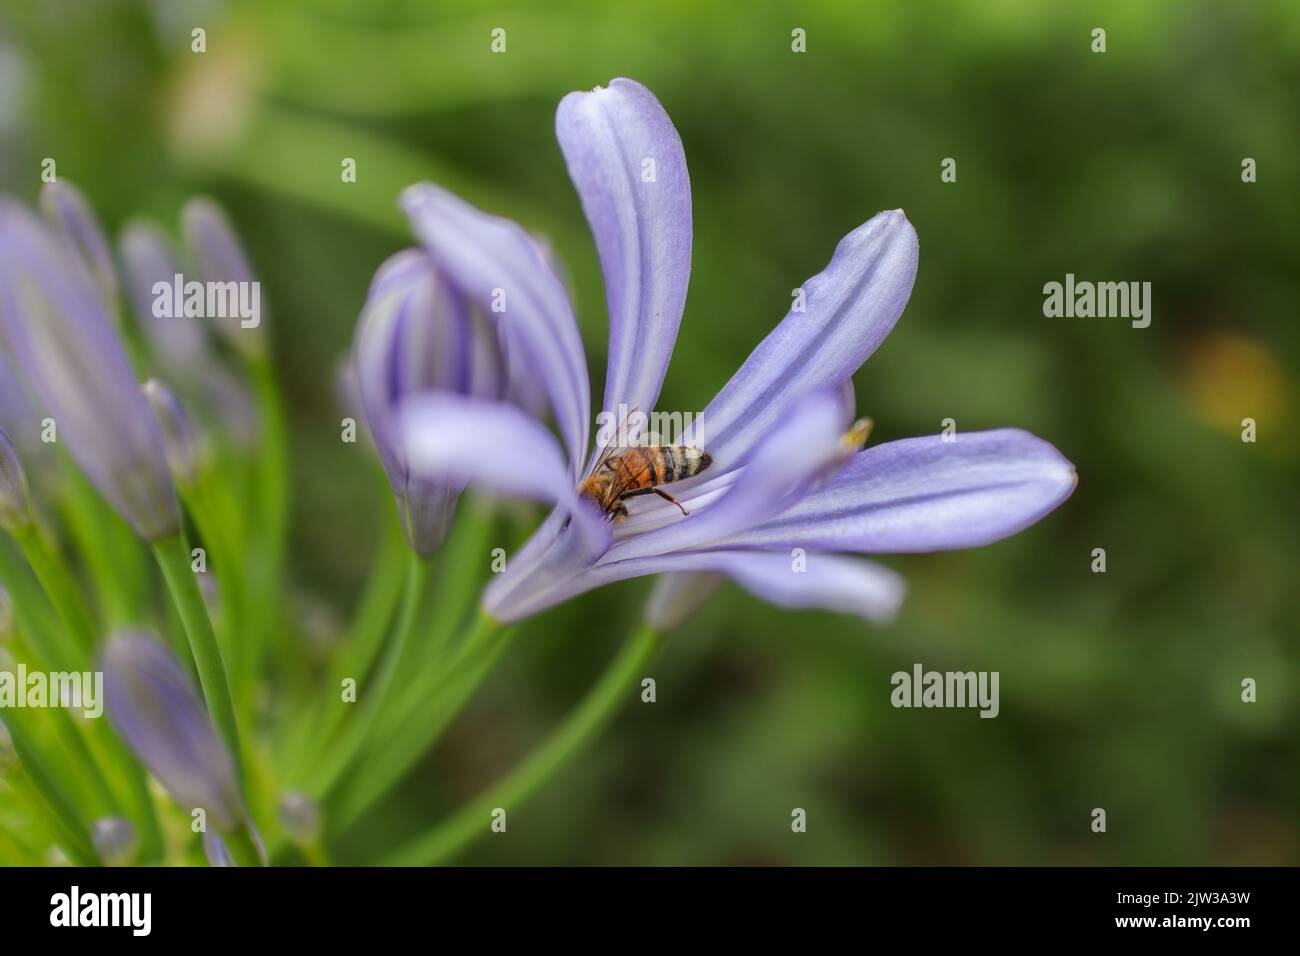 European Honey Bee Collects Pollen from Garden Plant African Lily. Apis Mellifera Pollinates Common Agapanthus during Spring. Stock Photo